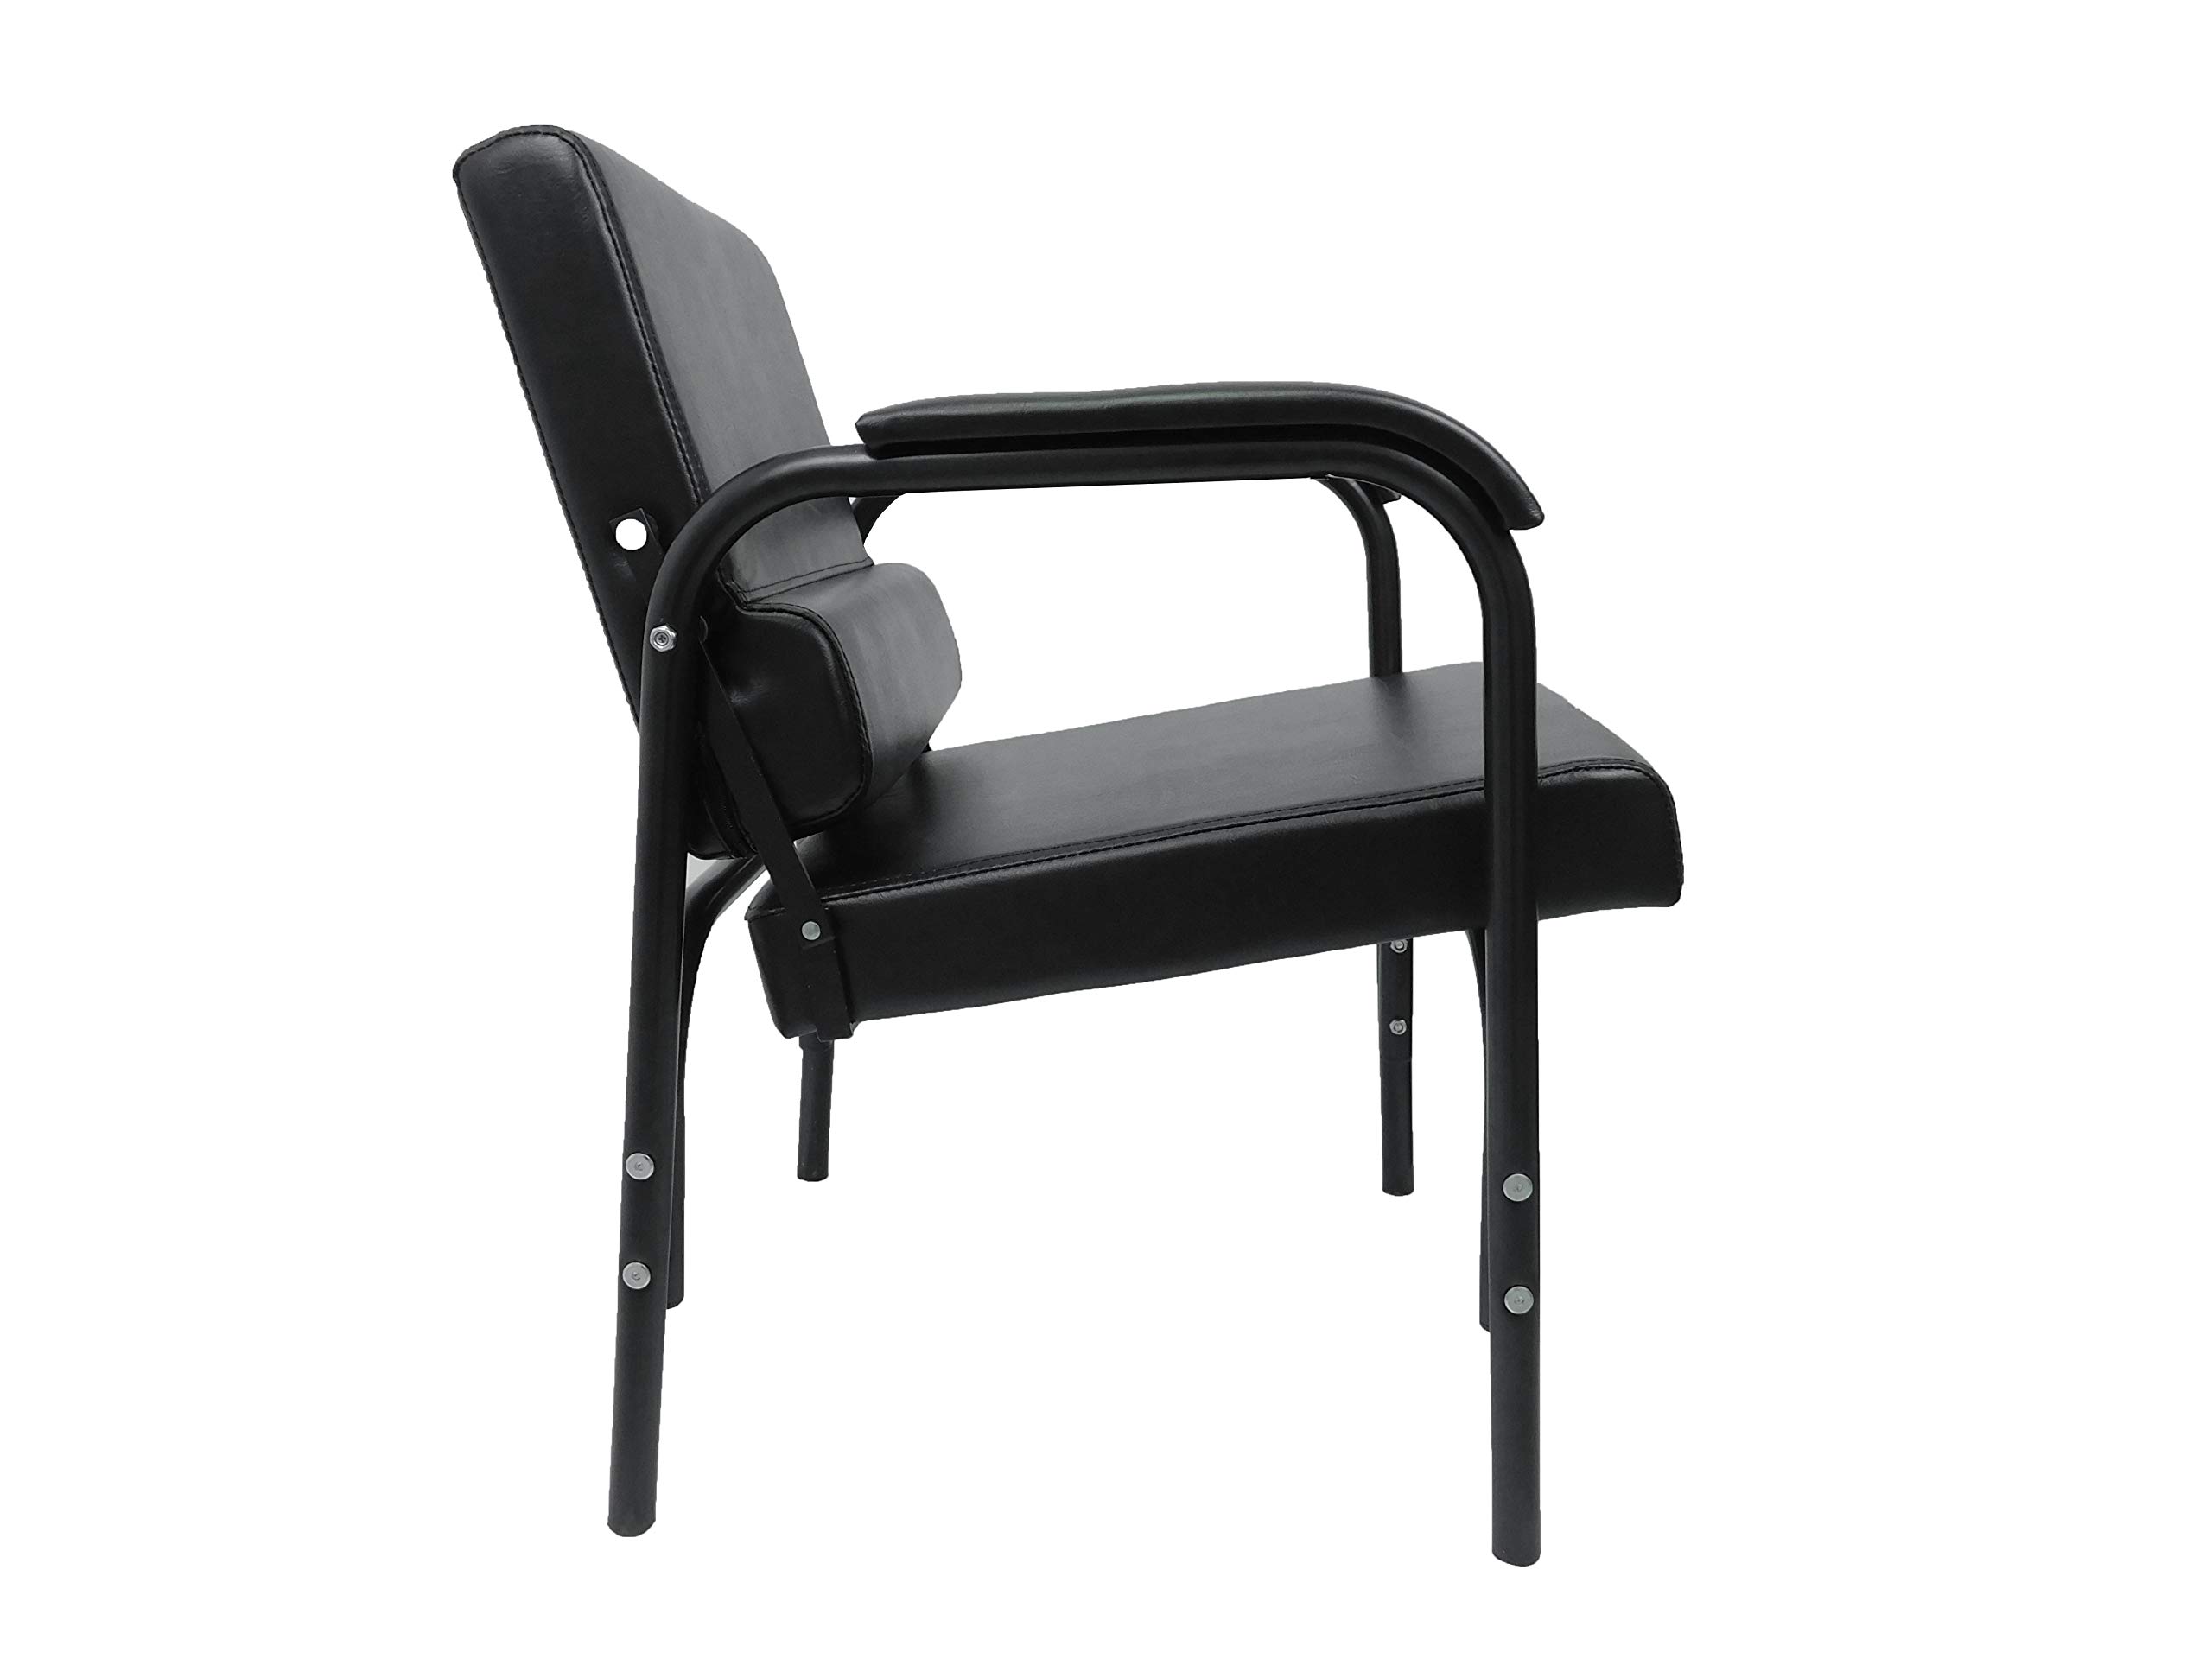 Auto-Reclining Shampoo Chair for Beauty Salon or Barber with Ultra Mid-Back Lumbar Support with Extended Cushion Armrests TLC-216B- eMark Beauty